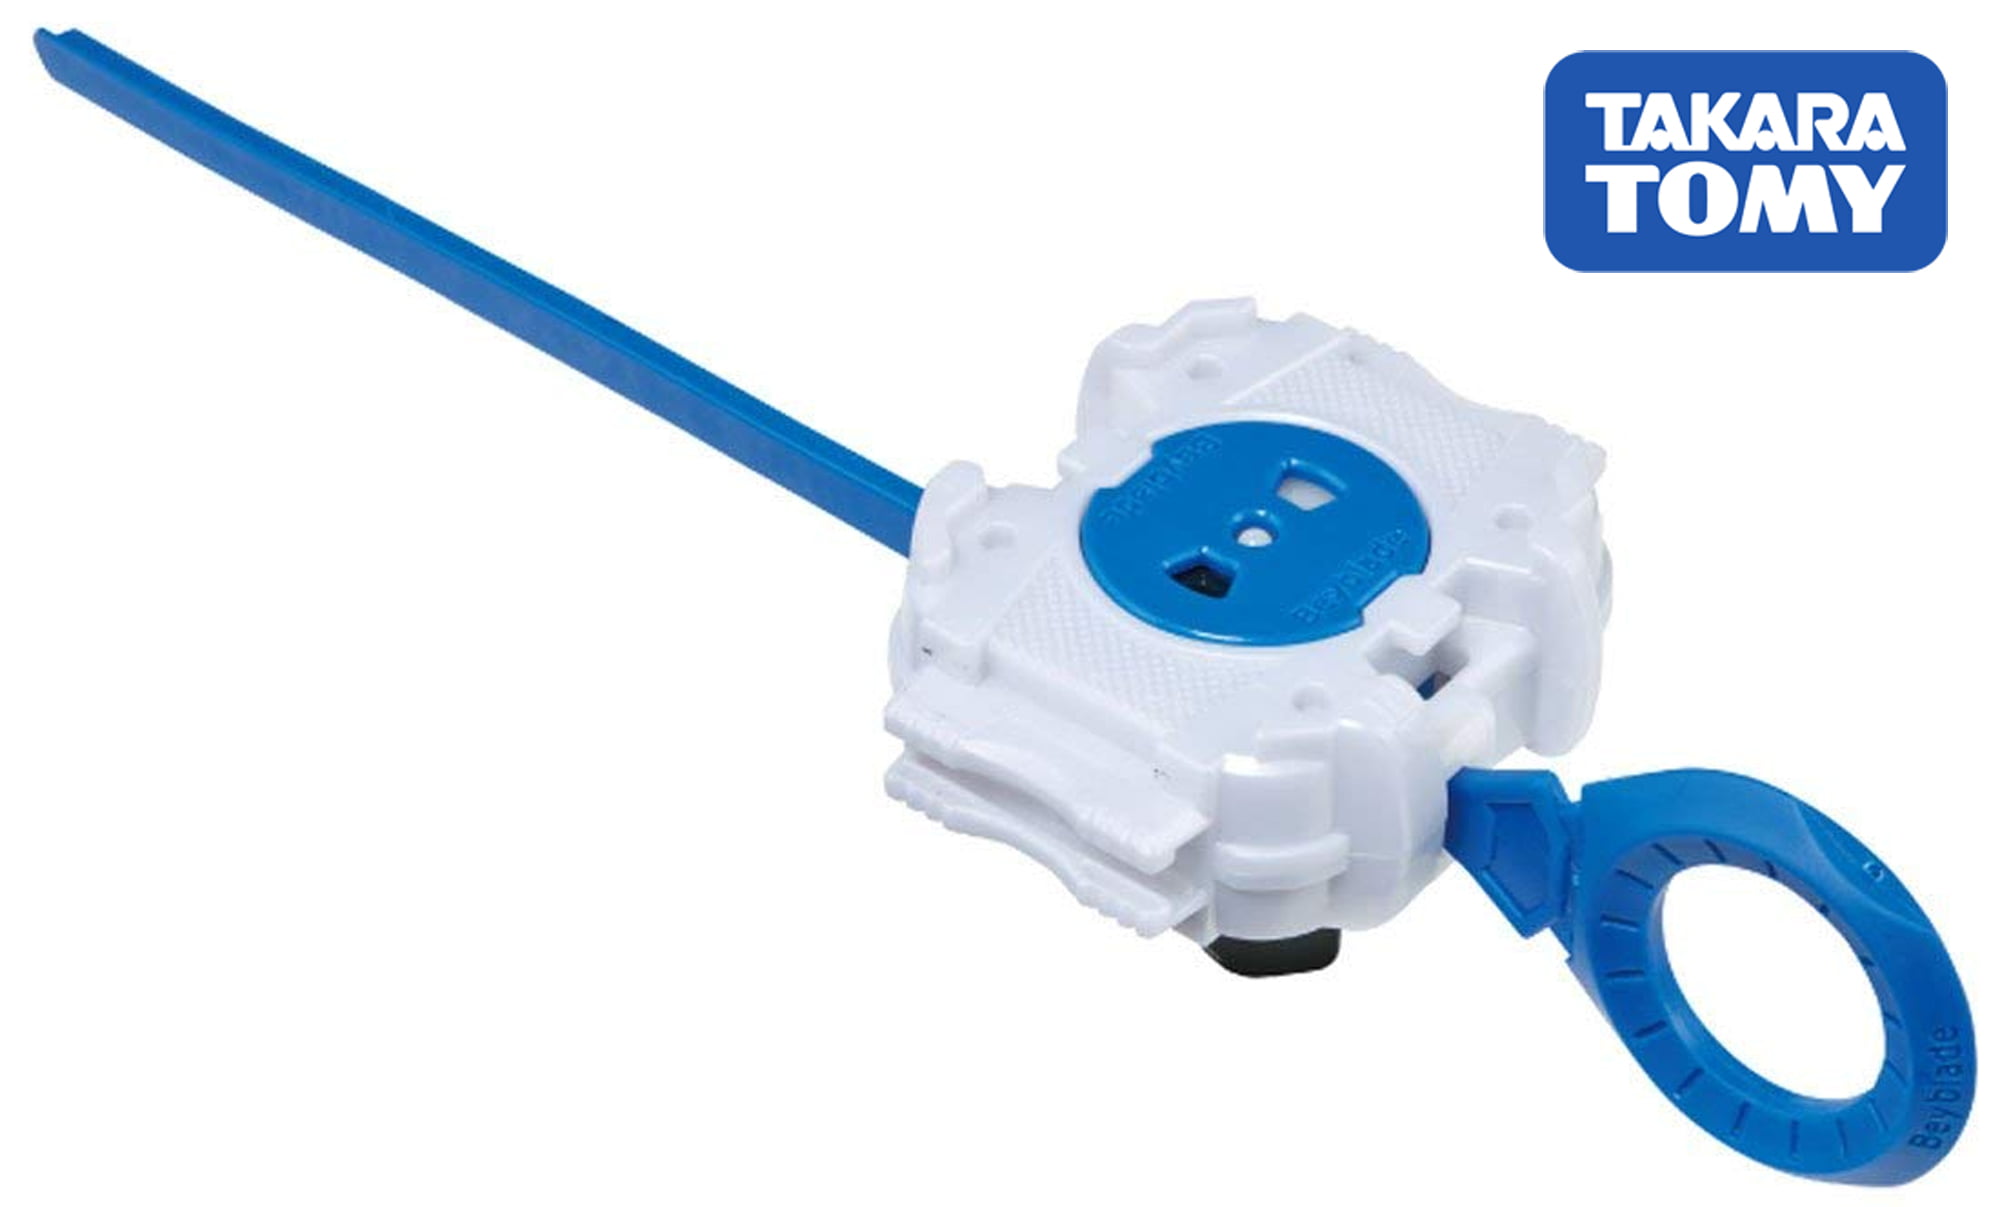 Beyblade ripcords Light Launcher 2 style ripcords 8/"